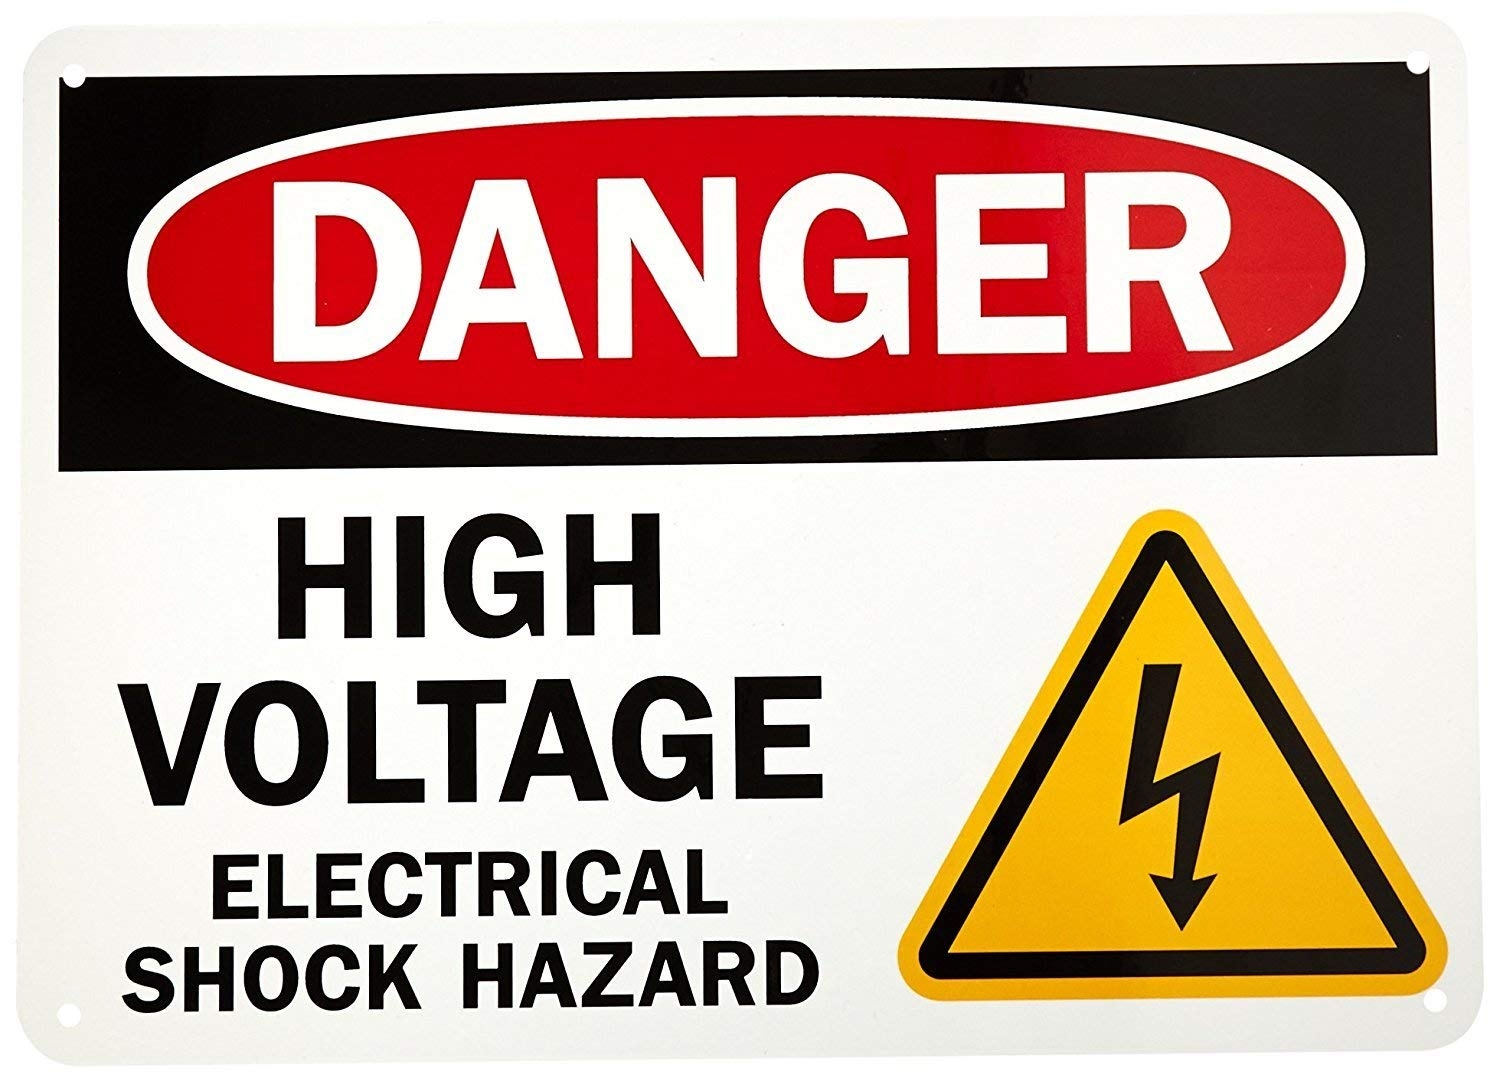 Amazon Danger High Voltage Electrical Shock Hazard 10 High X 14 Wide Black Red On White Self Adhesive Vinyl Sticker Indoor And Outdoor Use Rust Free UV Protected Waterproof Industrial Scientific